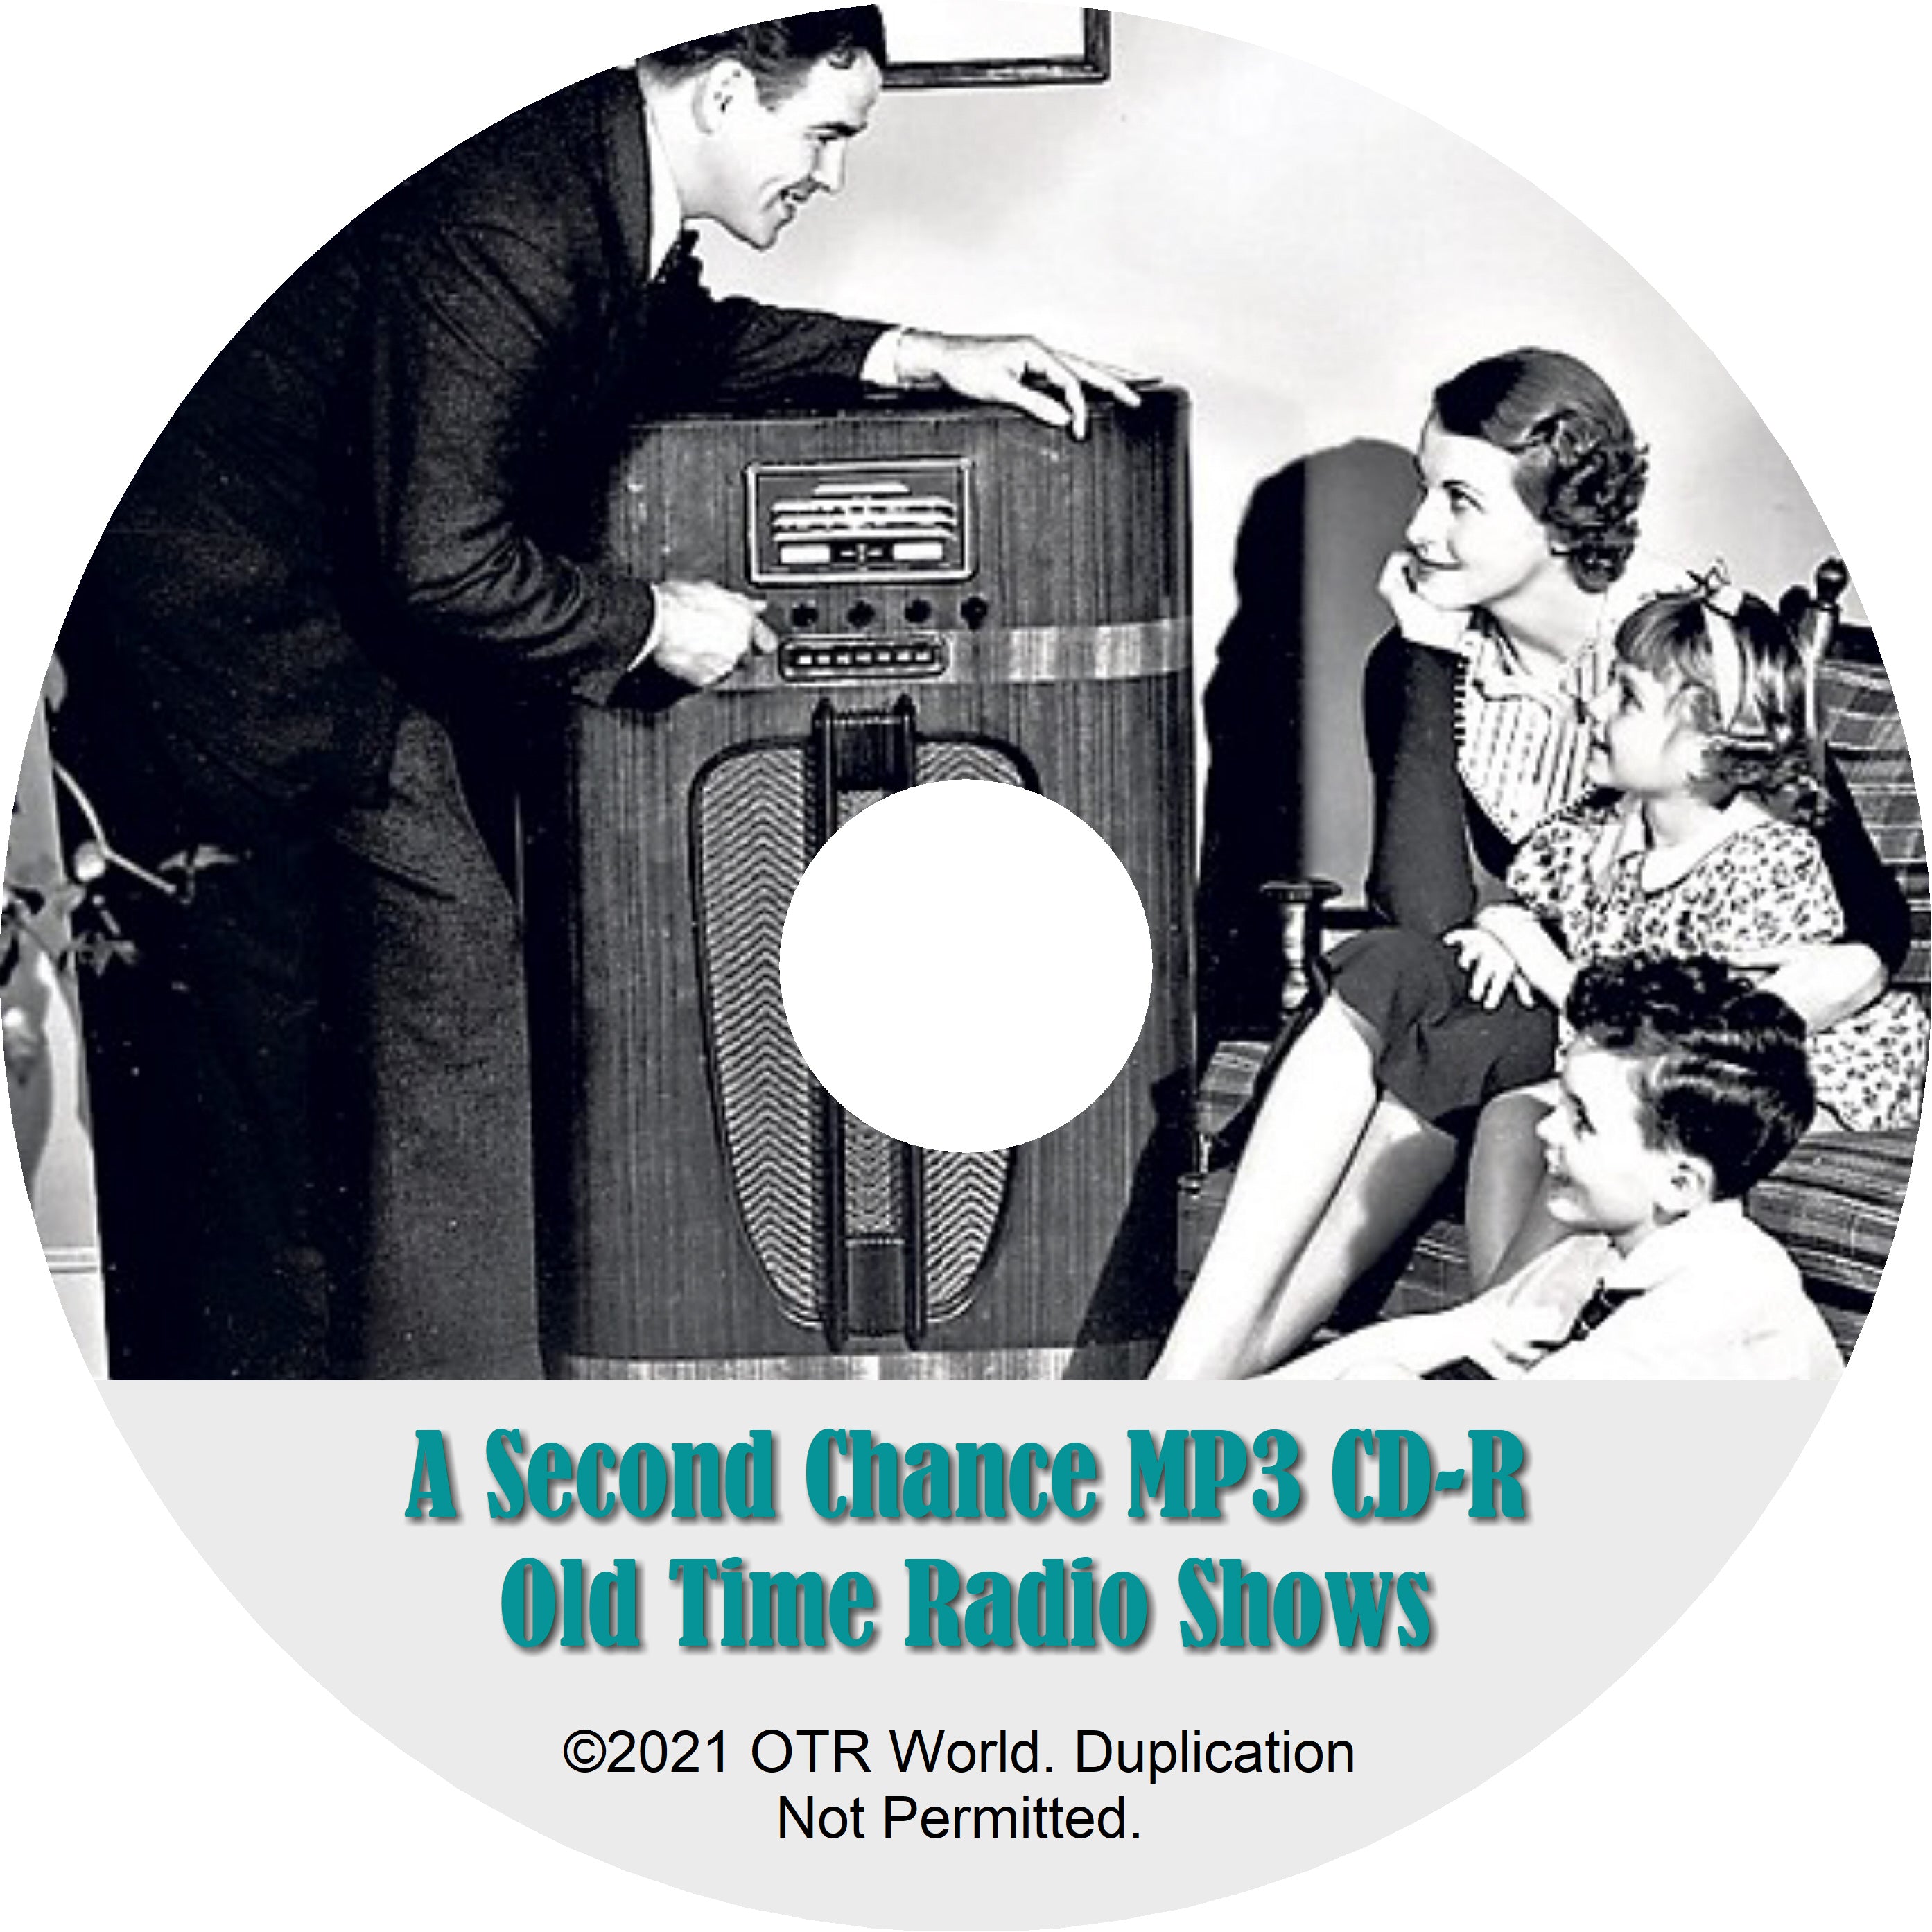 A Second Chance OTRS OTR Old Time Radio Shows MP3 On CD-R 14 Episodes